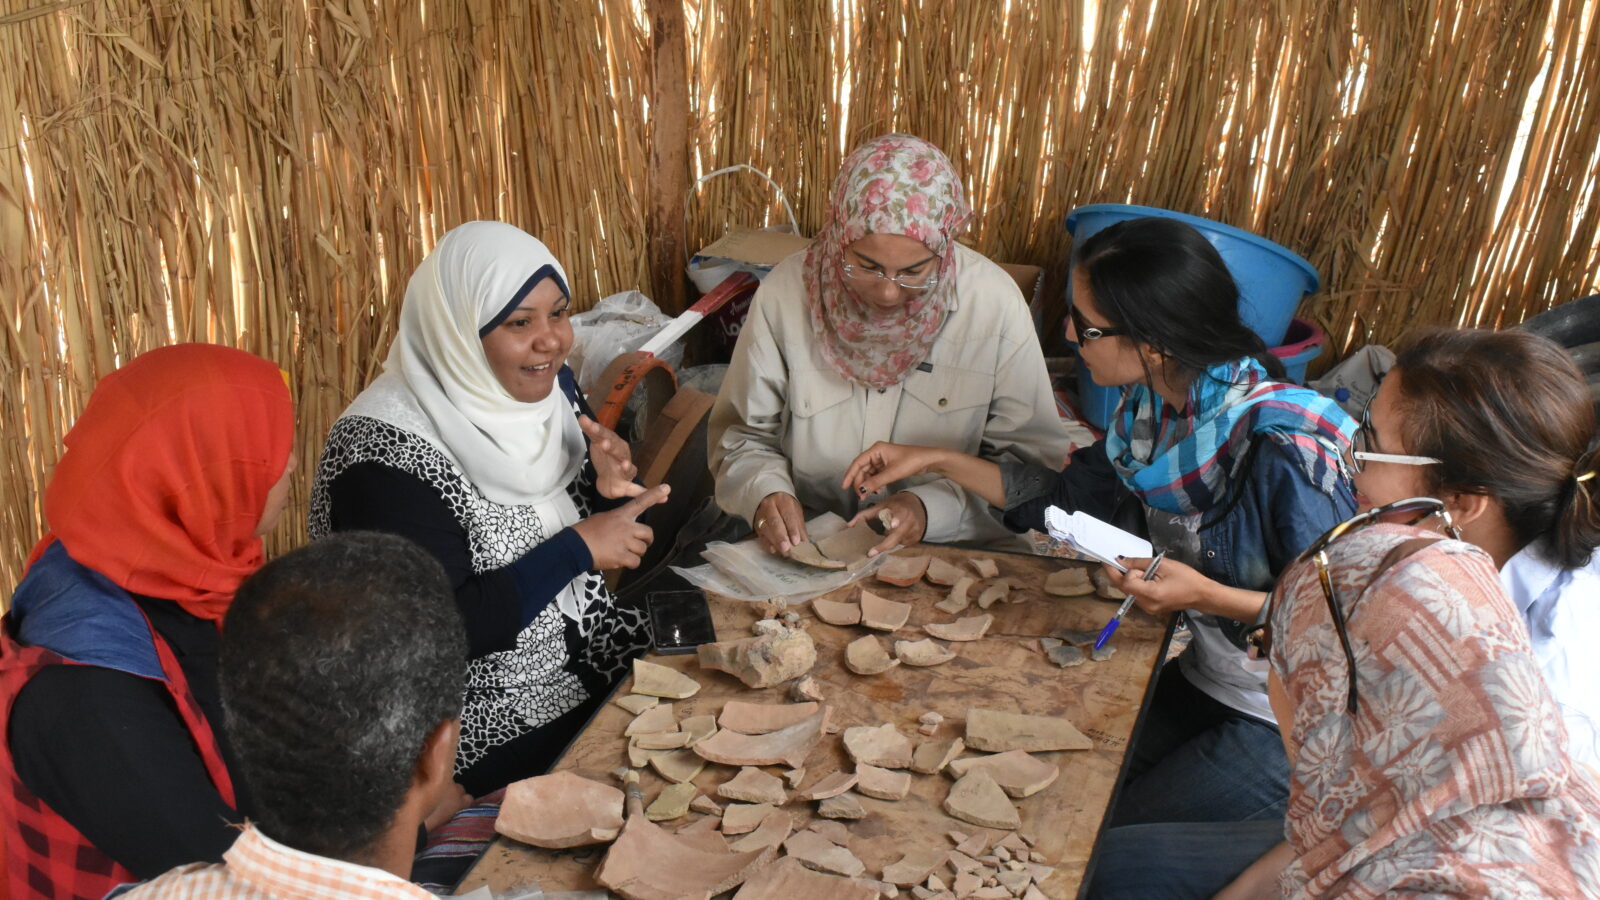 Women examine artefacts as part of cultural heritage Newton Prize project